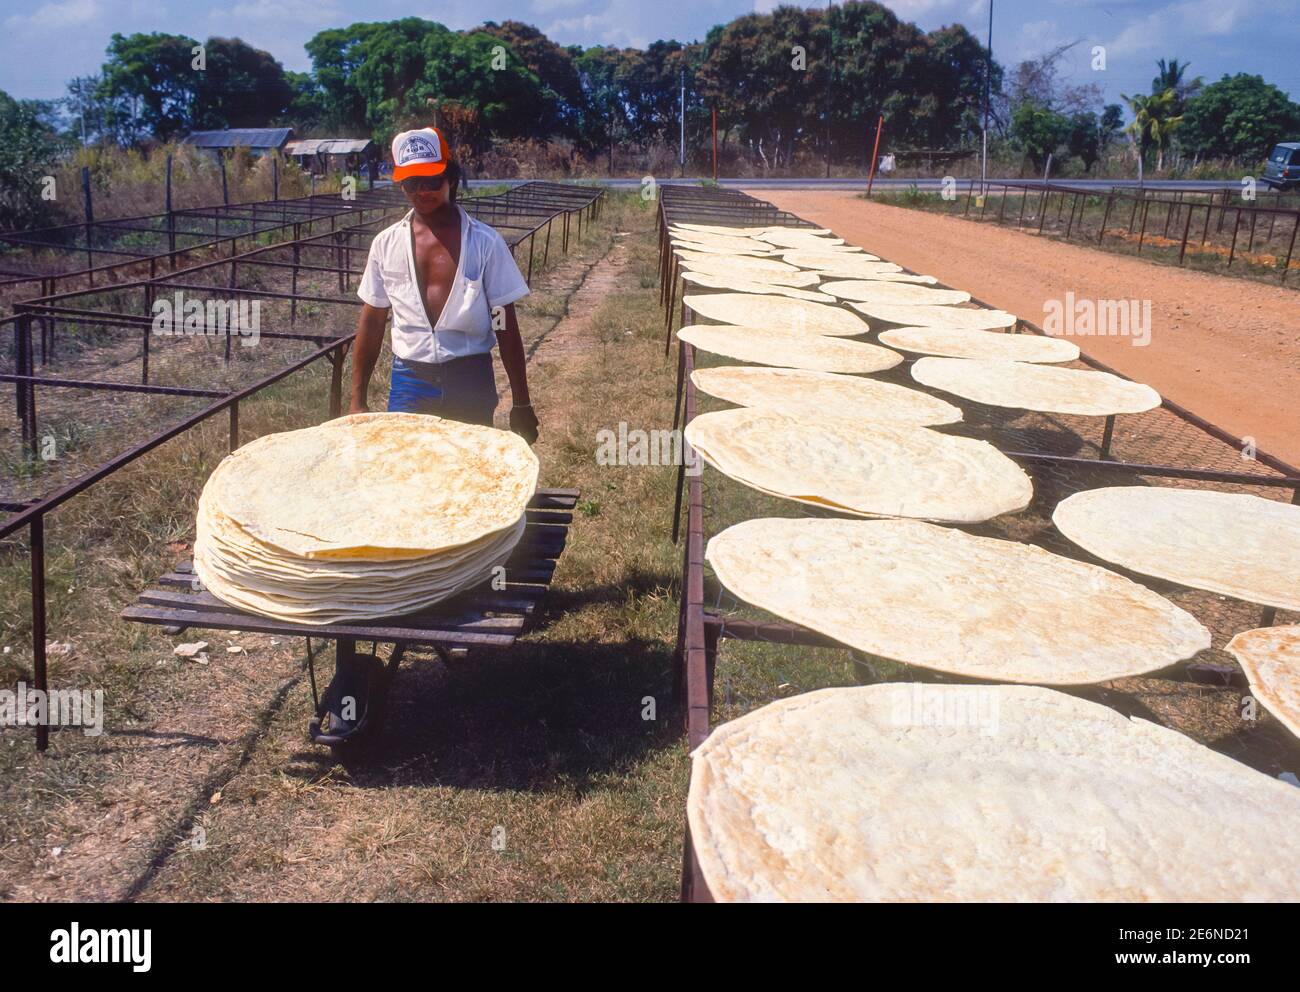 MATURIN, MONAGAS STATE, VENEZUELA, 1988 - Small farm worker moves Casabe cakes, made from Cassava root, for drying on racks. Stock Photo